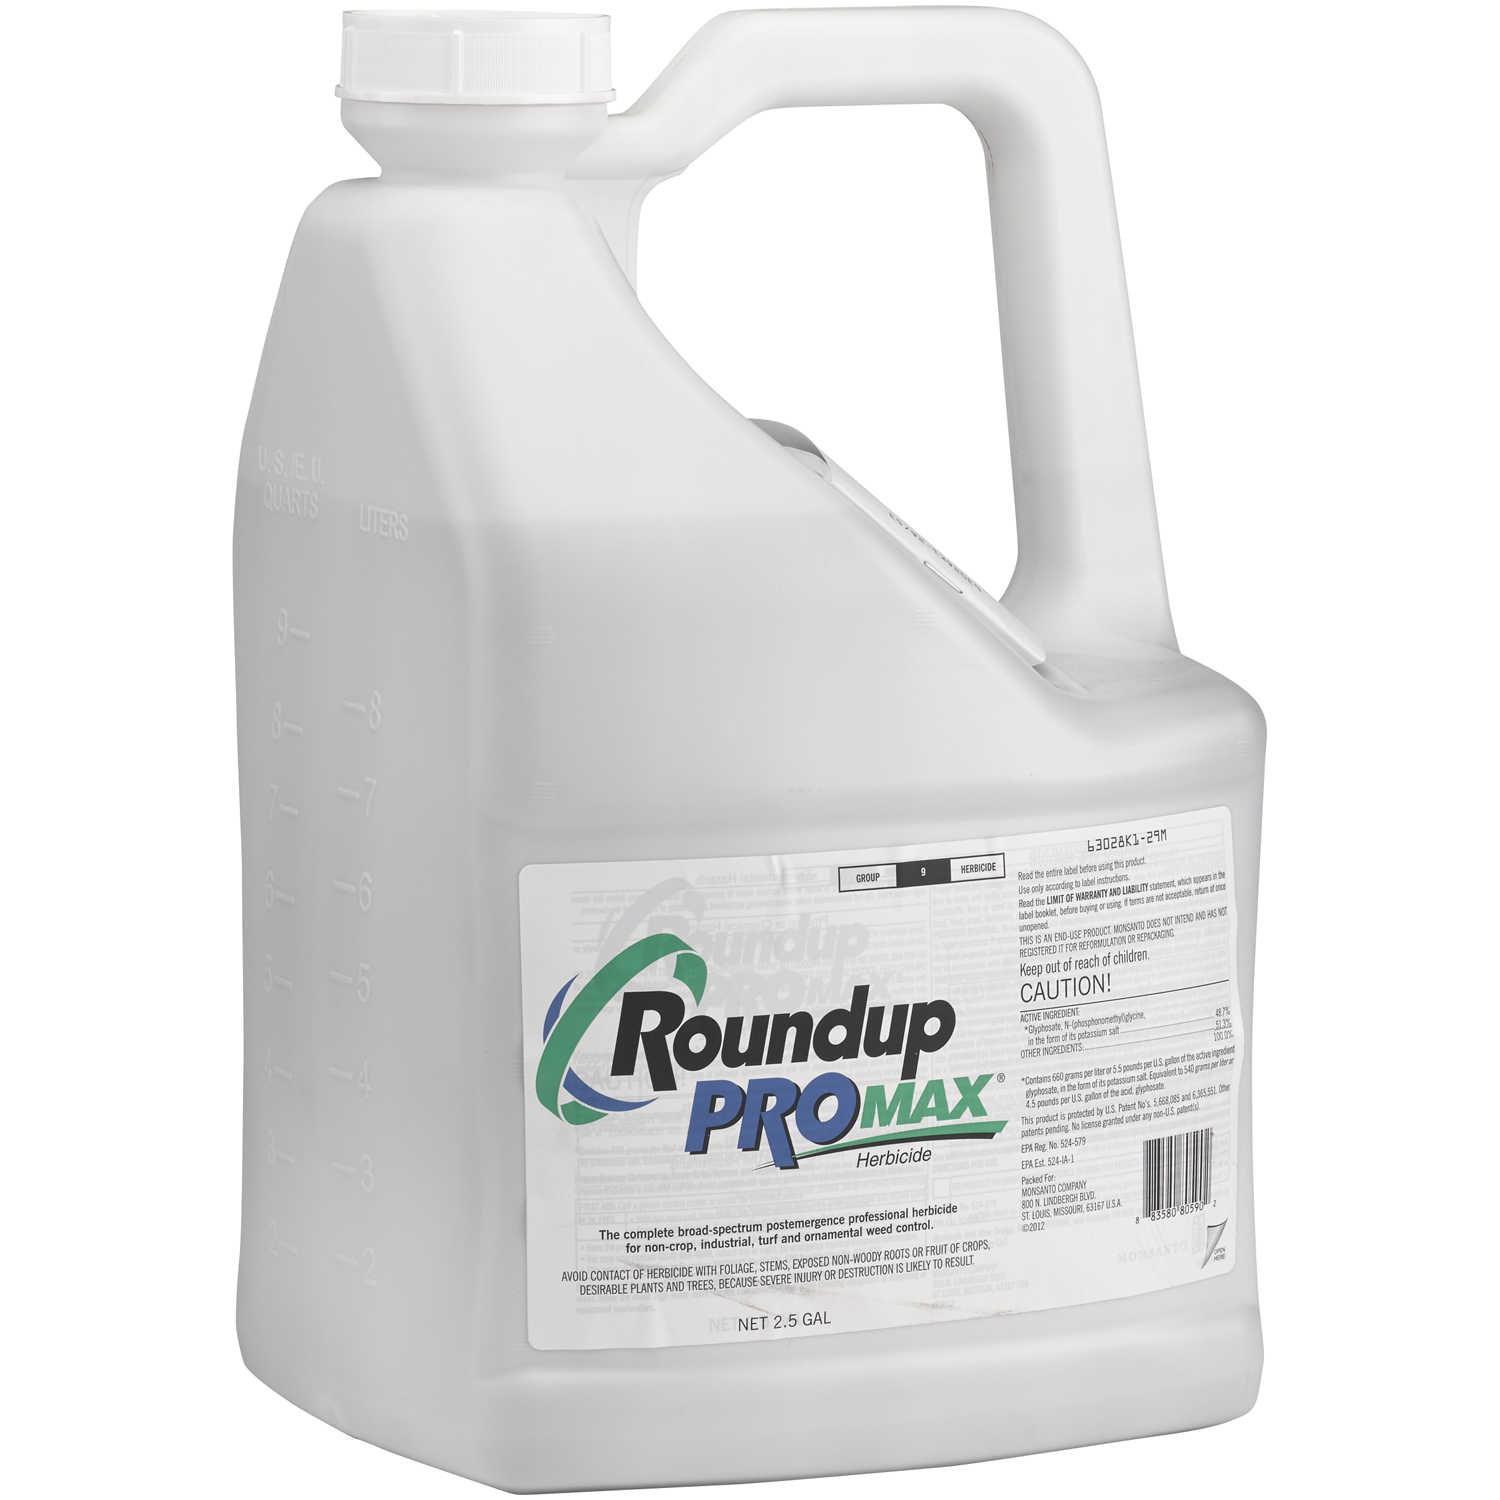 Roundup ProMax Herbicide Forestry Suppliers, Inc. 